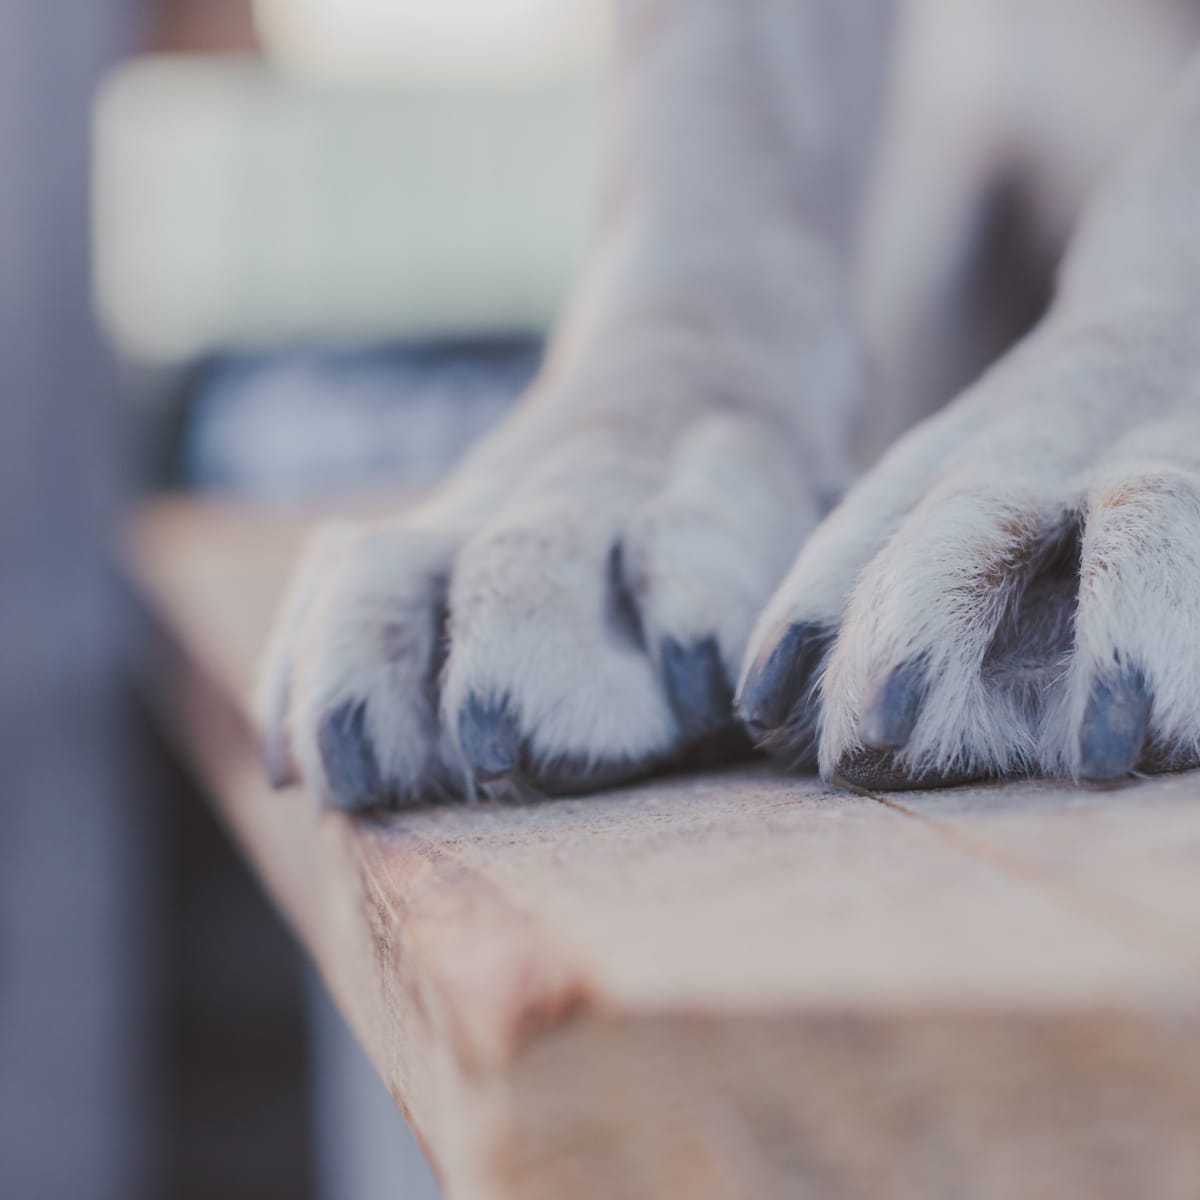 10 Dog Breeds With Webbed Feet (and Why) - PetHelpful